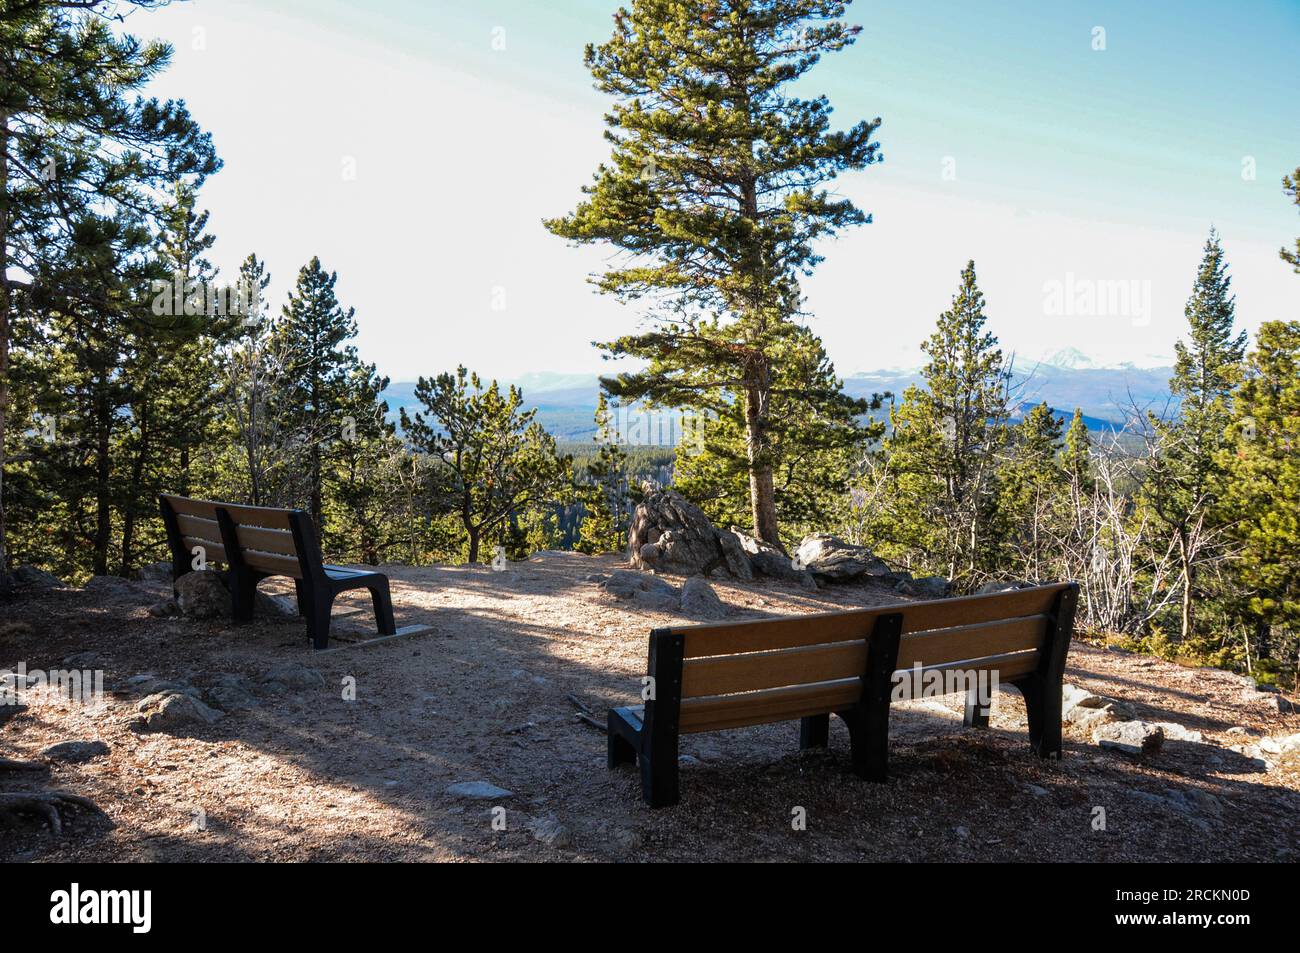 Benches overlooking rocky mountains at Golden Gate Canyon State Park, Colorado, USA Stock Photo